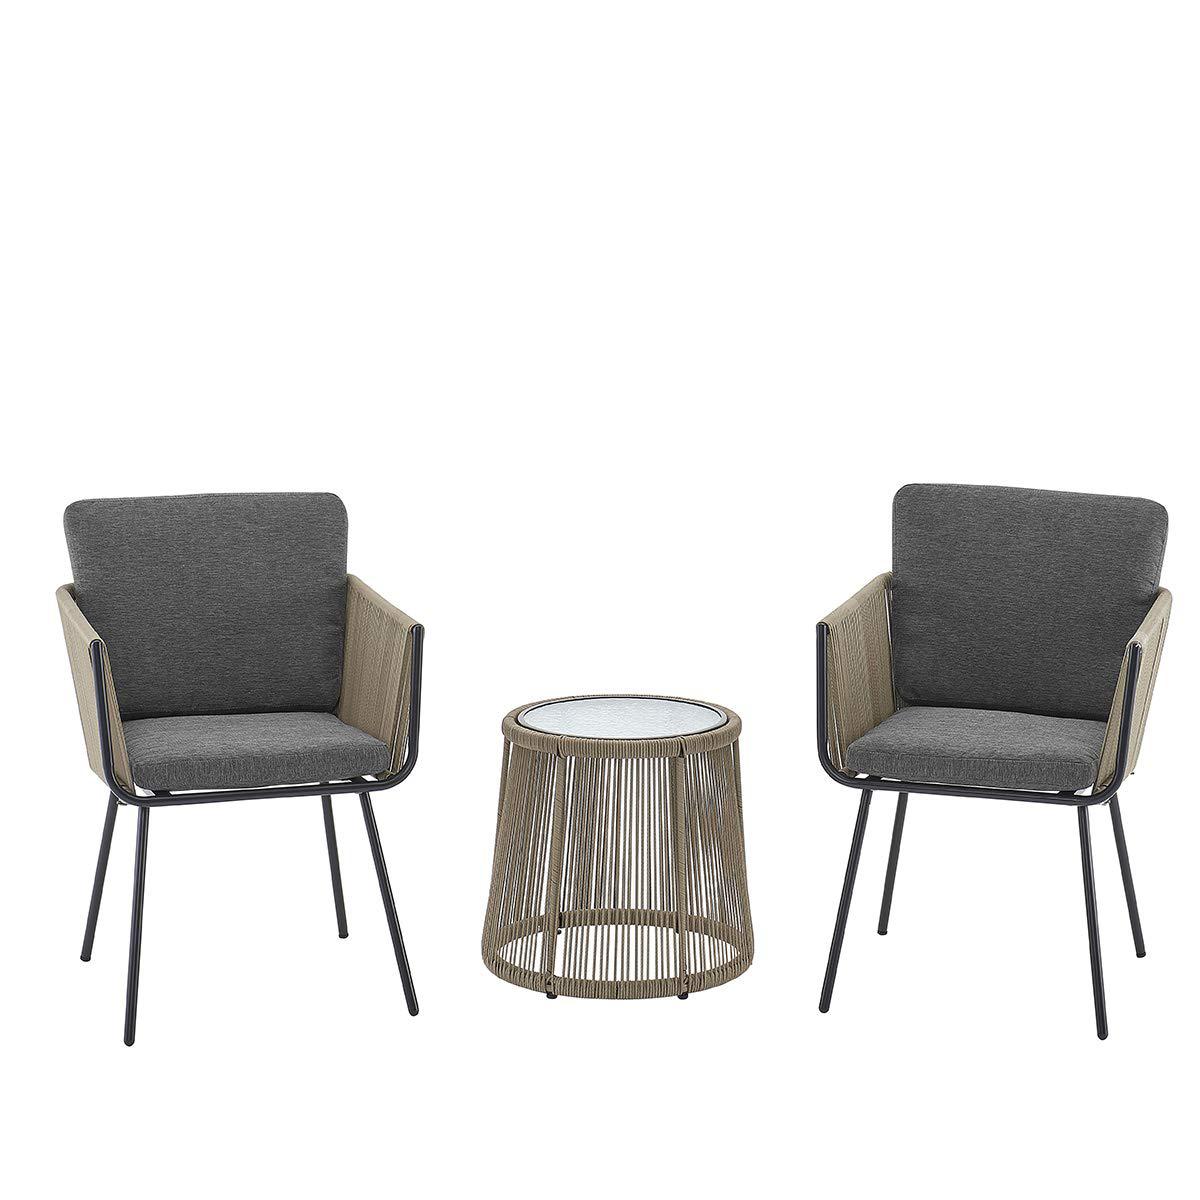 barton 3 pieces wicker chair set w/glass table gray outdoor patio furniture wicker rattan modern conversation chat seating